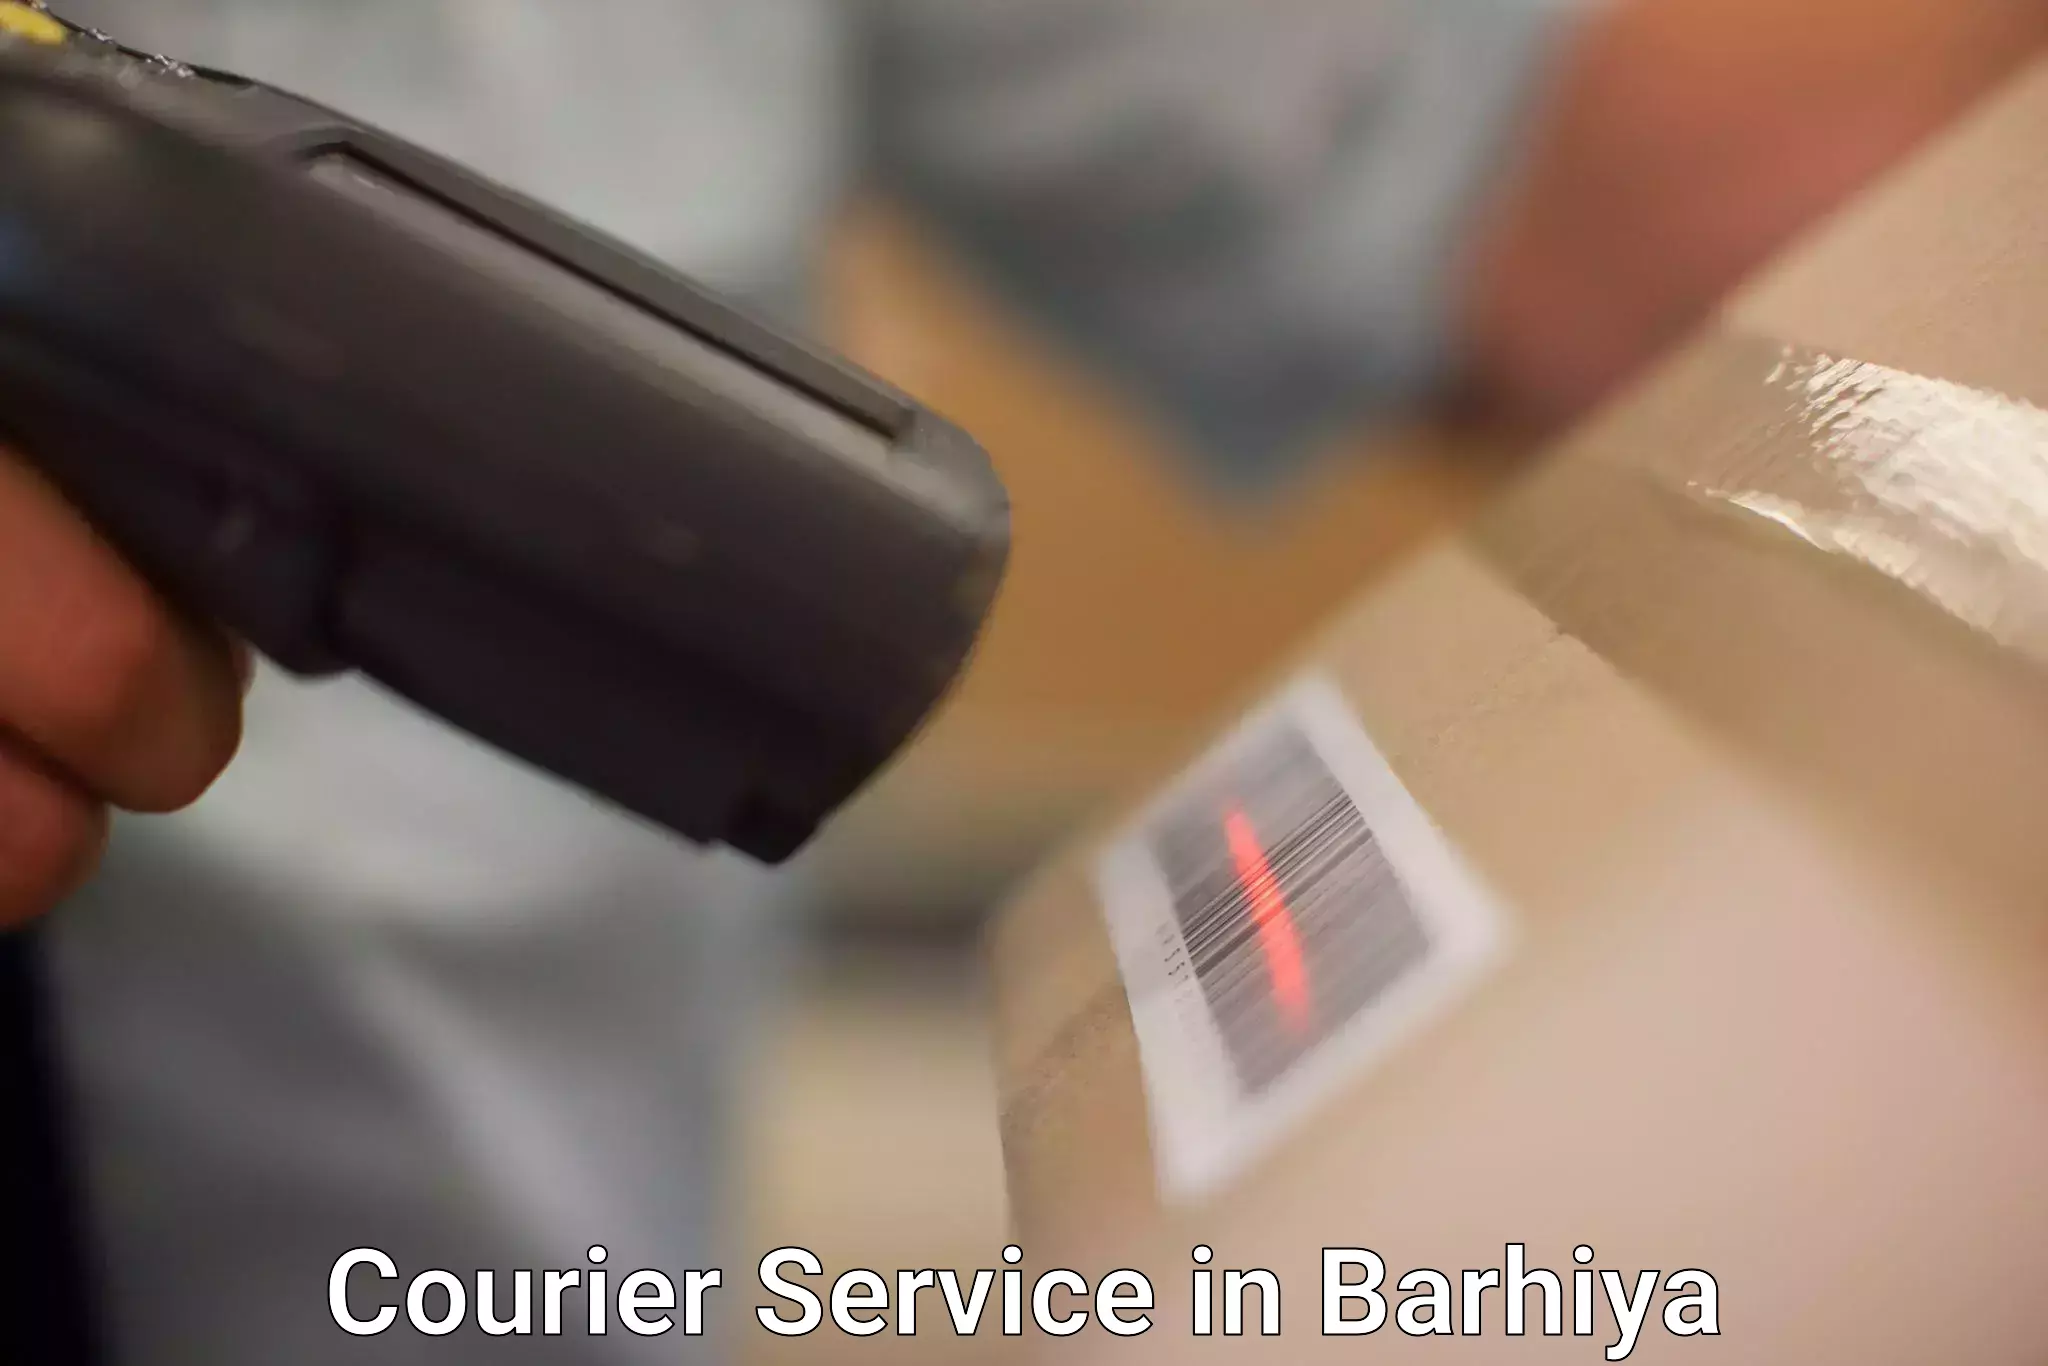 Customer-friendly courier services in Barhiya